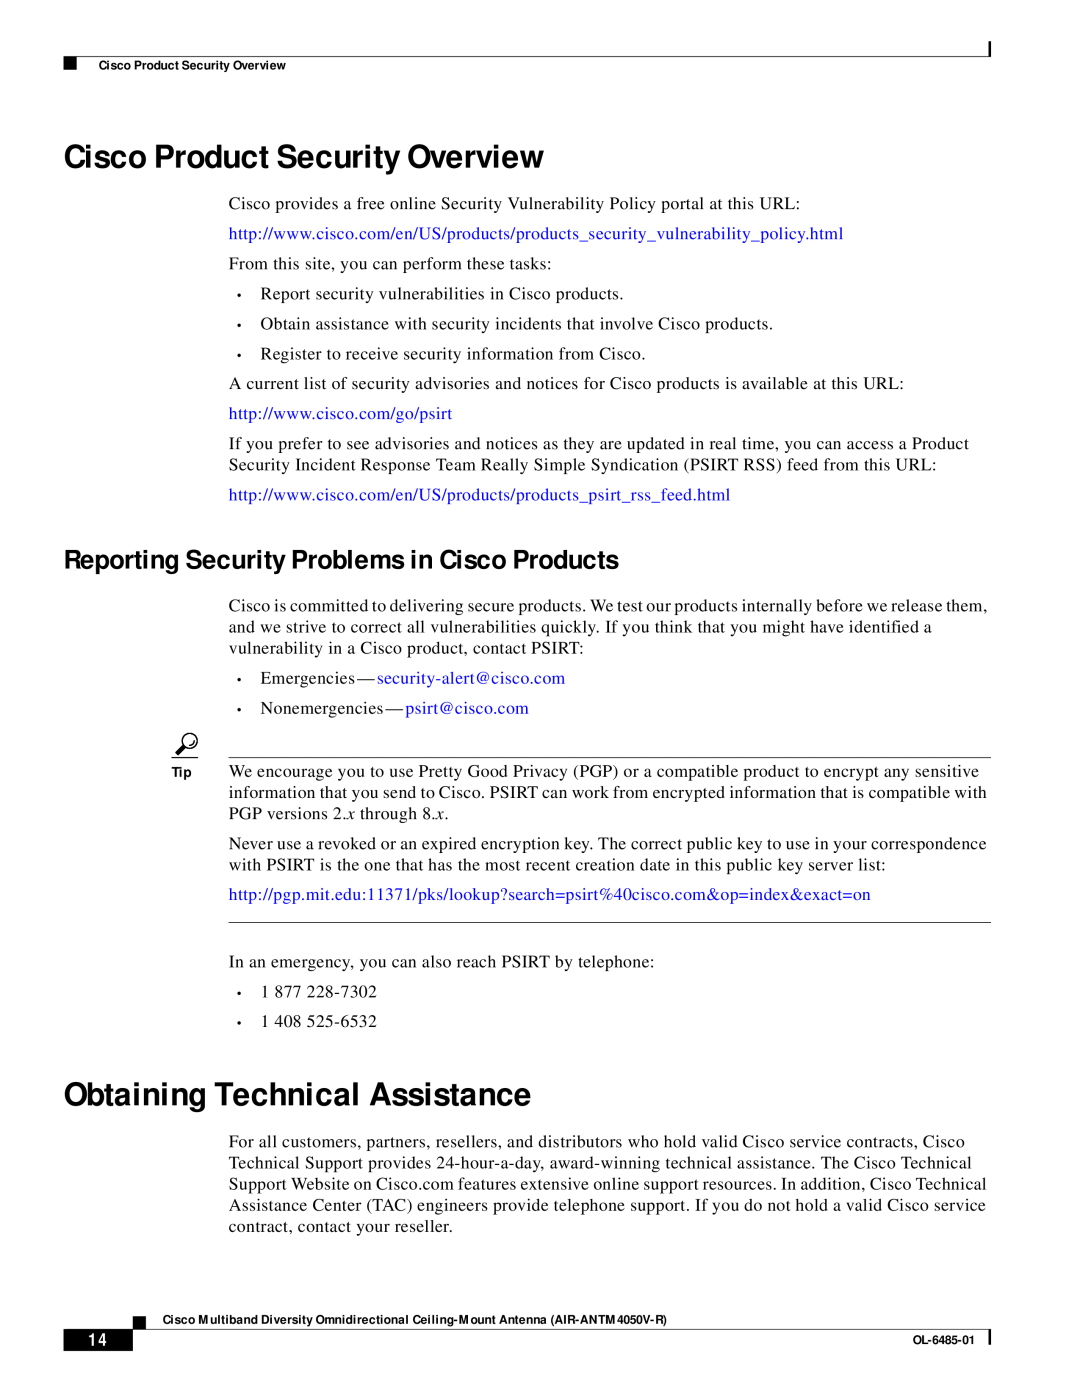 Cisco Systems AIR-ANTM4050V-R warranty Cisco Product Security Overview, Obtaining Technical Assistance 